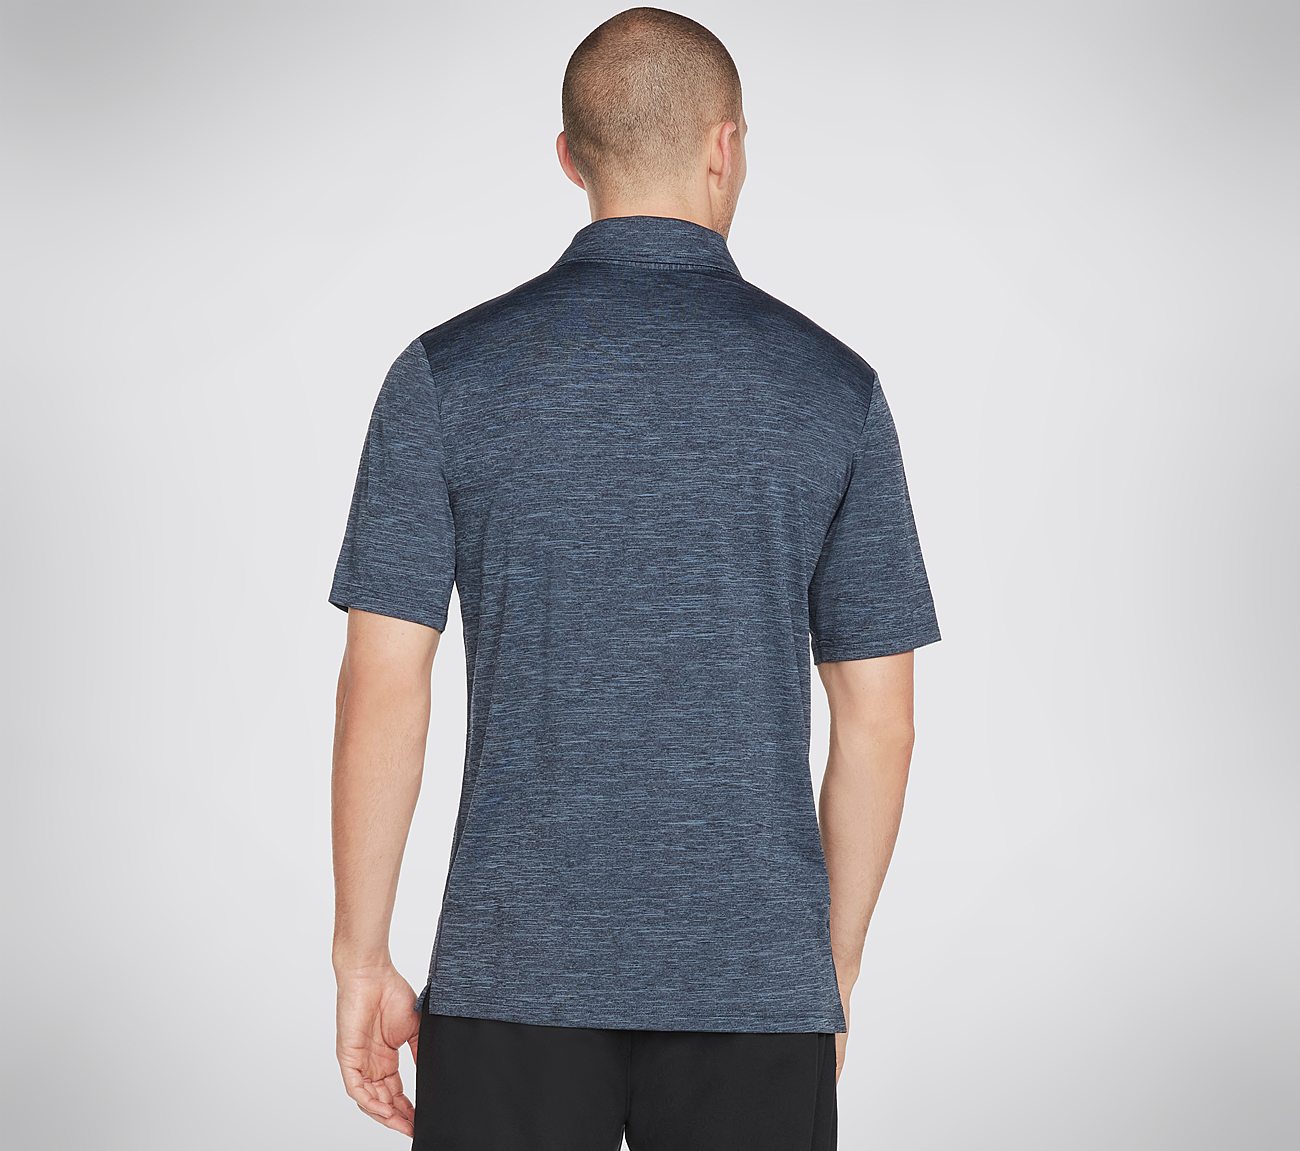 ON THE ROAD POLO, BLUE/GREY Apparel Top View